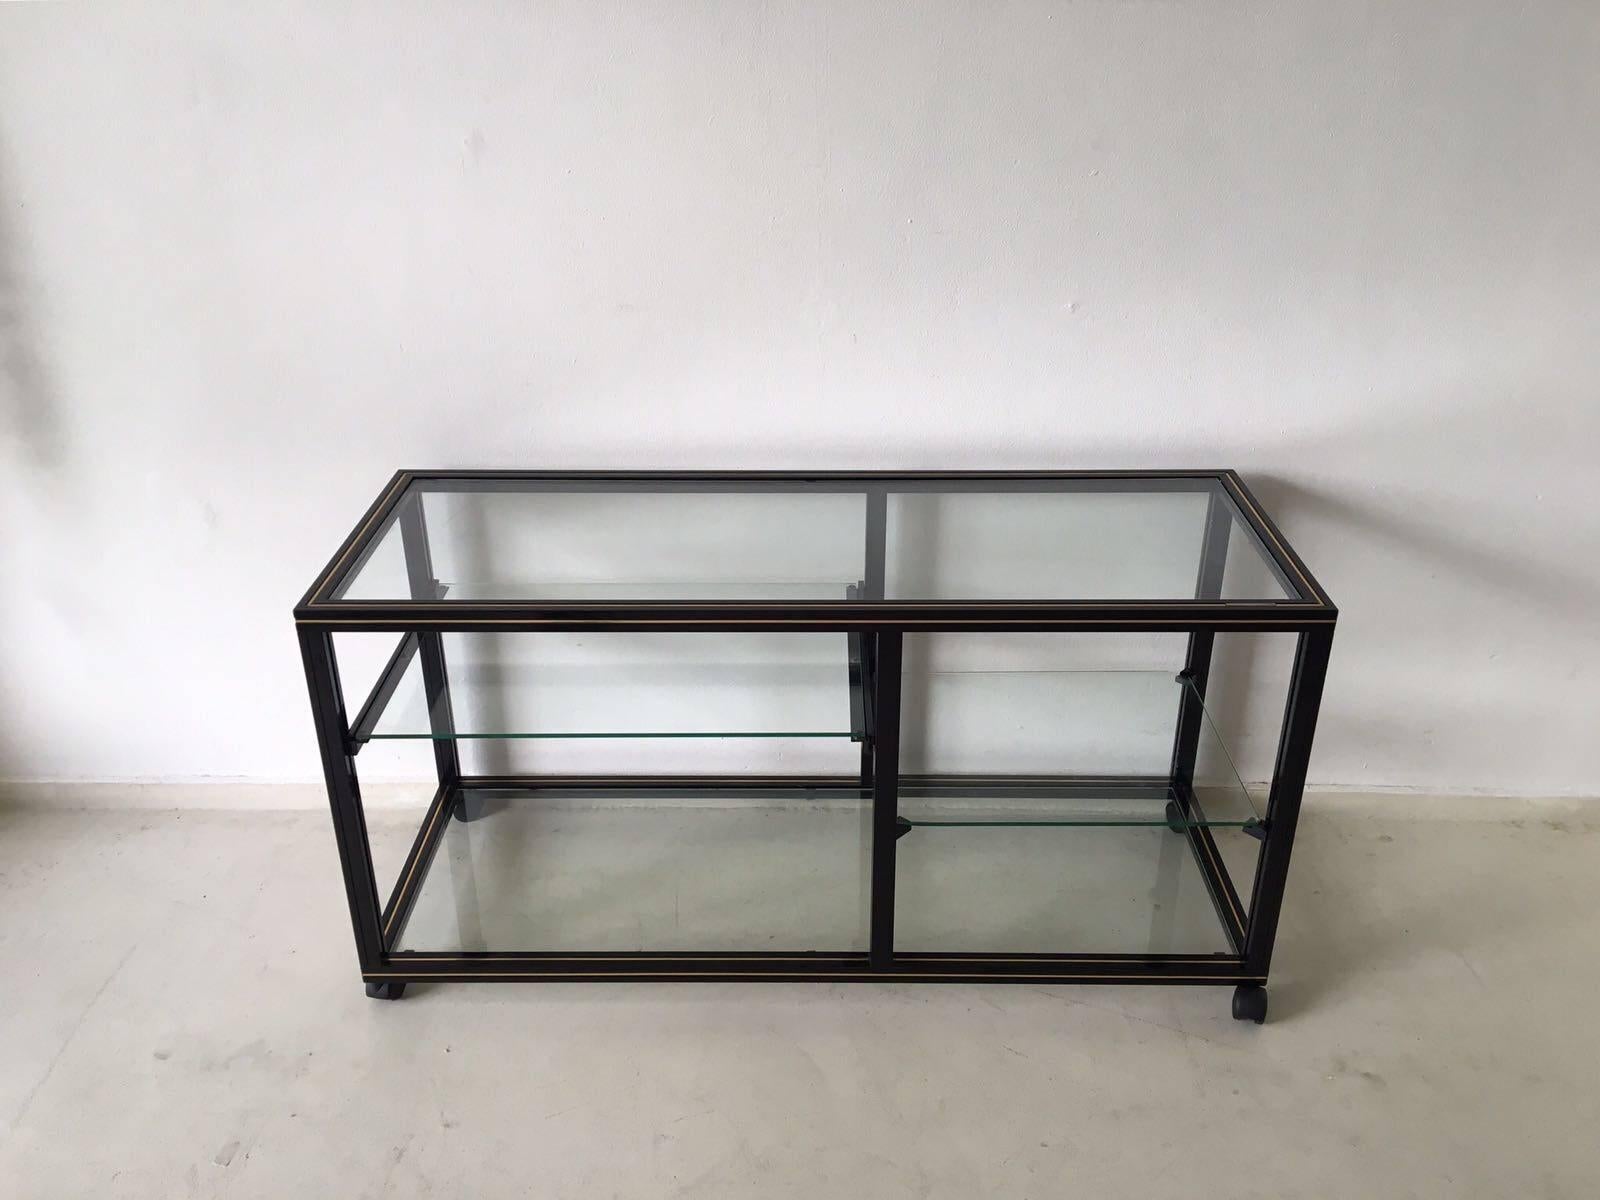 French Mid-Century Modern Tv Table with Extendable Glass Sheet by Pierre Vandel, 1970s